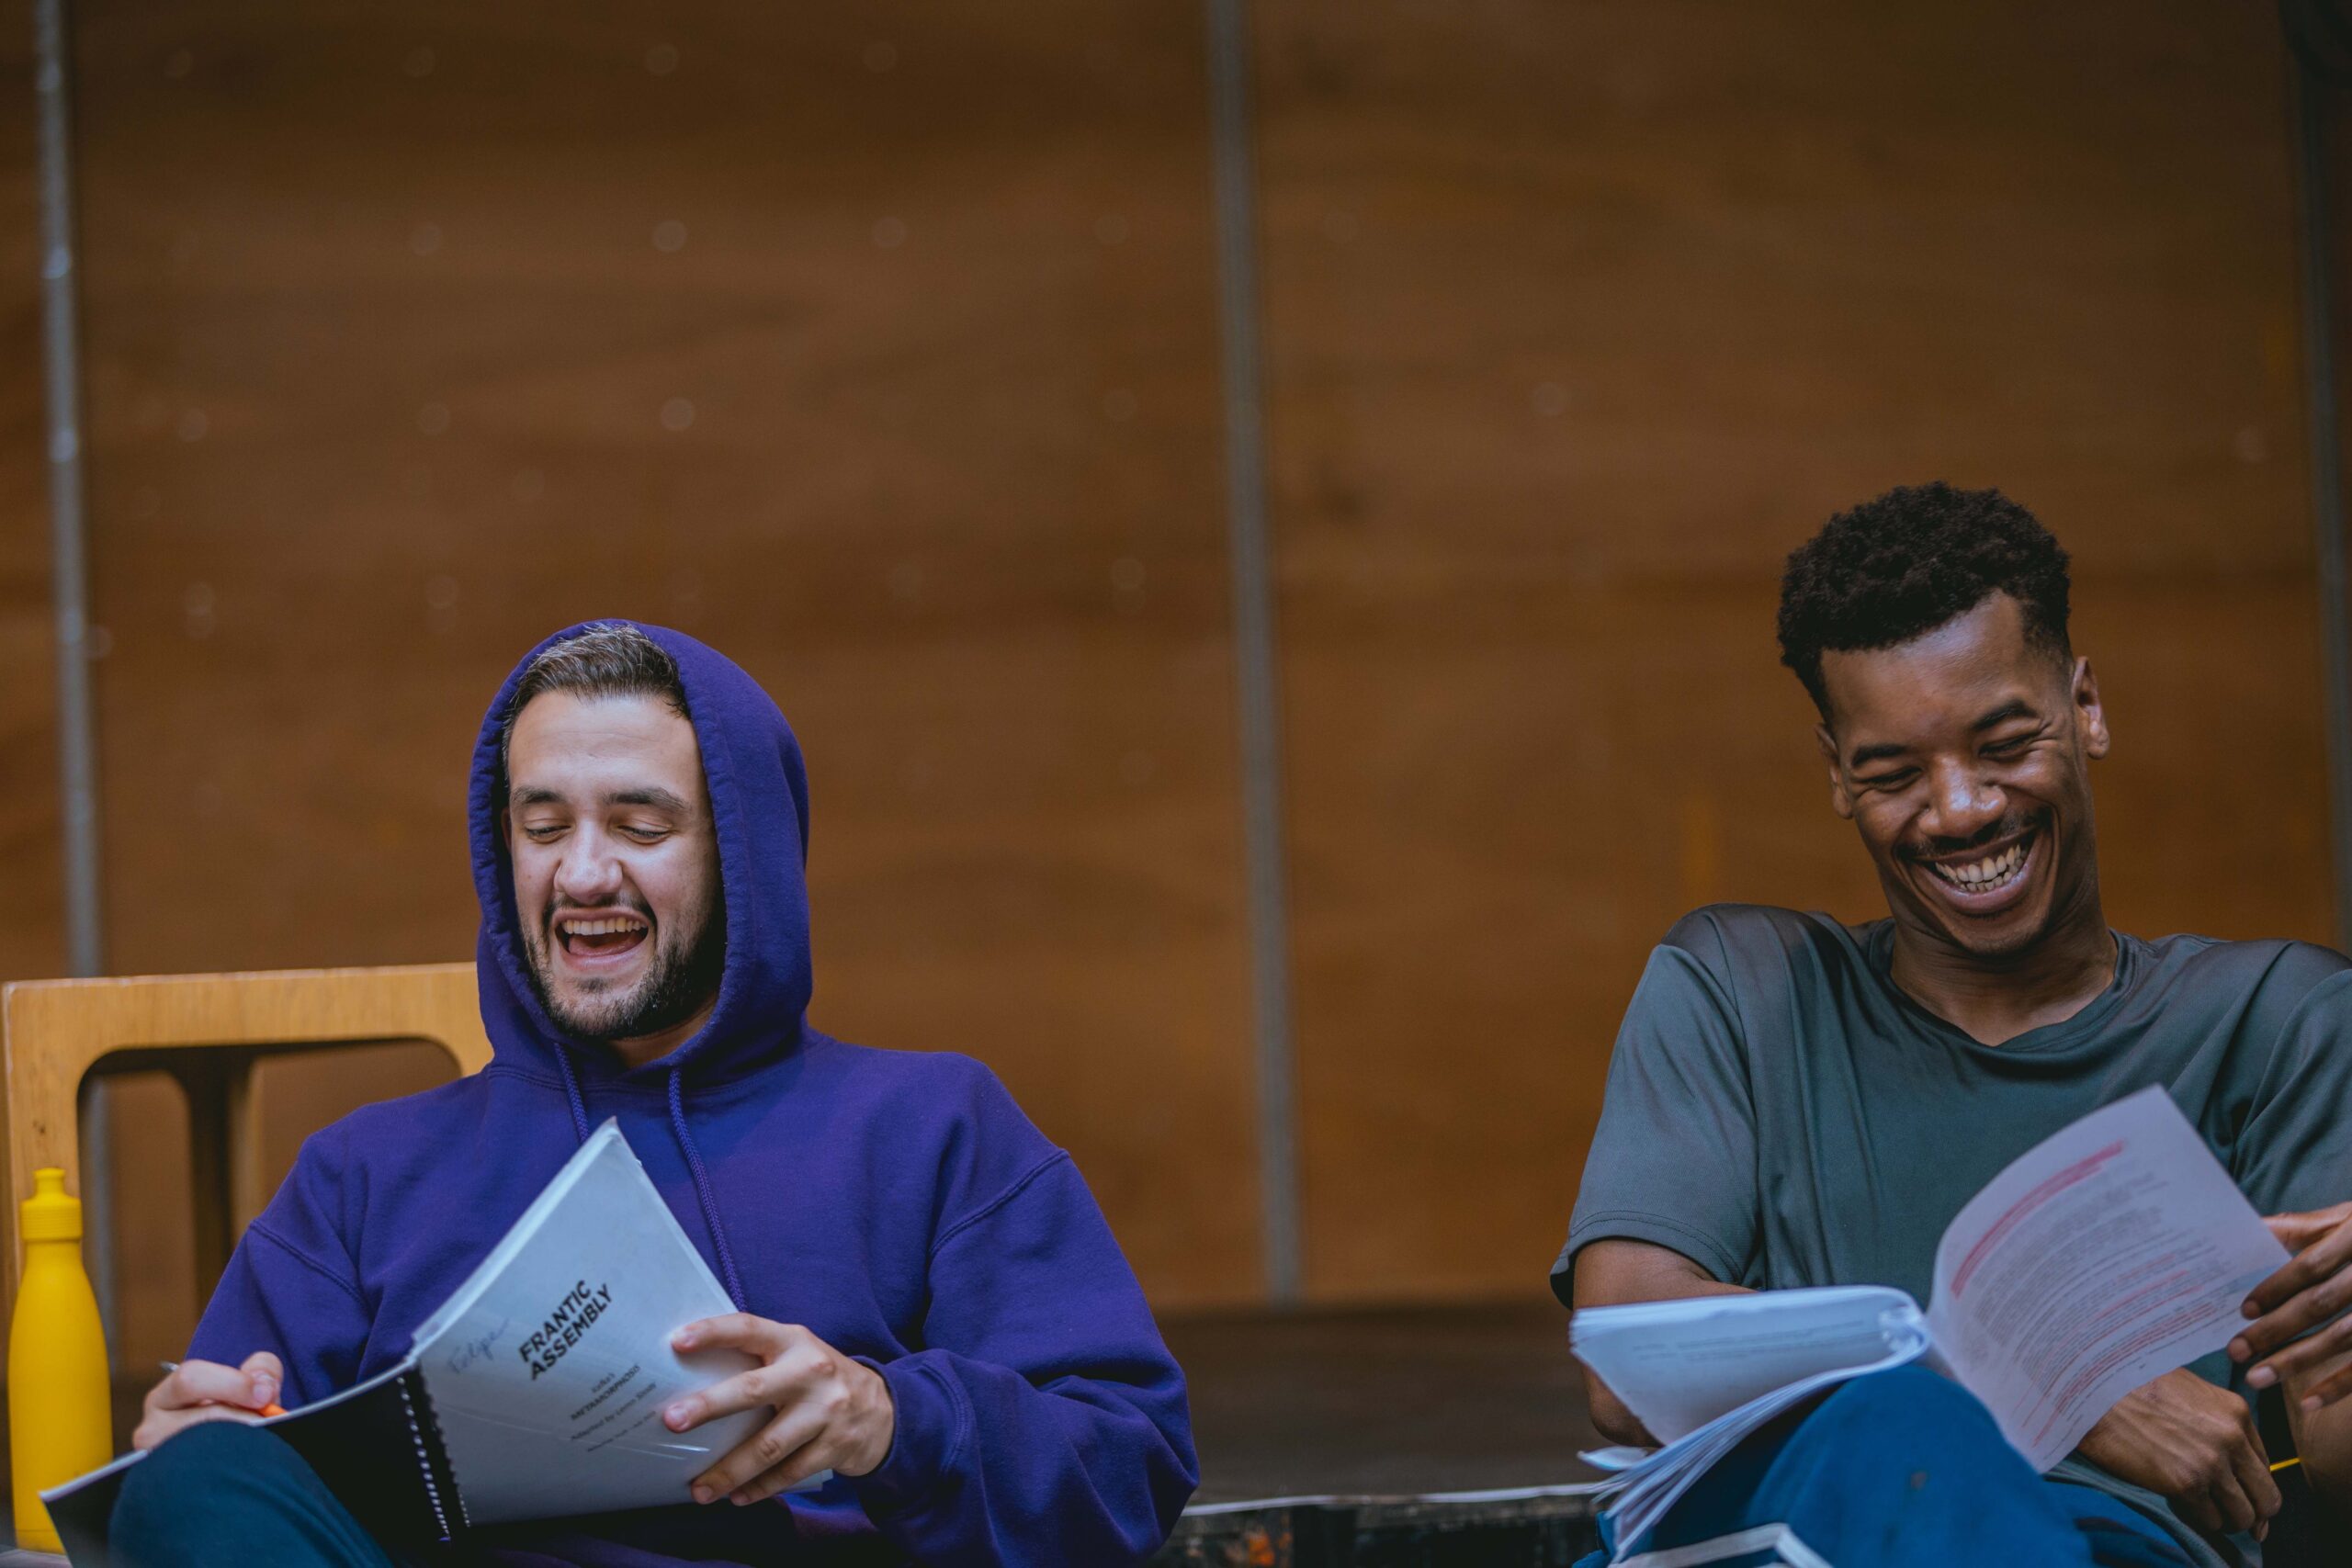 In a wood-cladded rehearsal room, Felipe Pacheco (Gregor) and Troy Glasgow (Father) are sitting together discussion the scripts in their hands. Both are laughing with happy expressions.